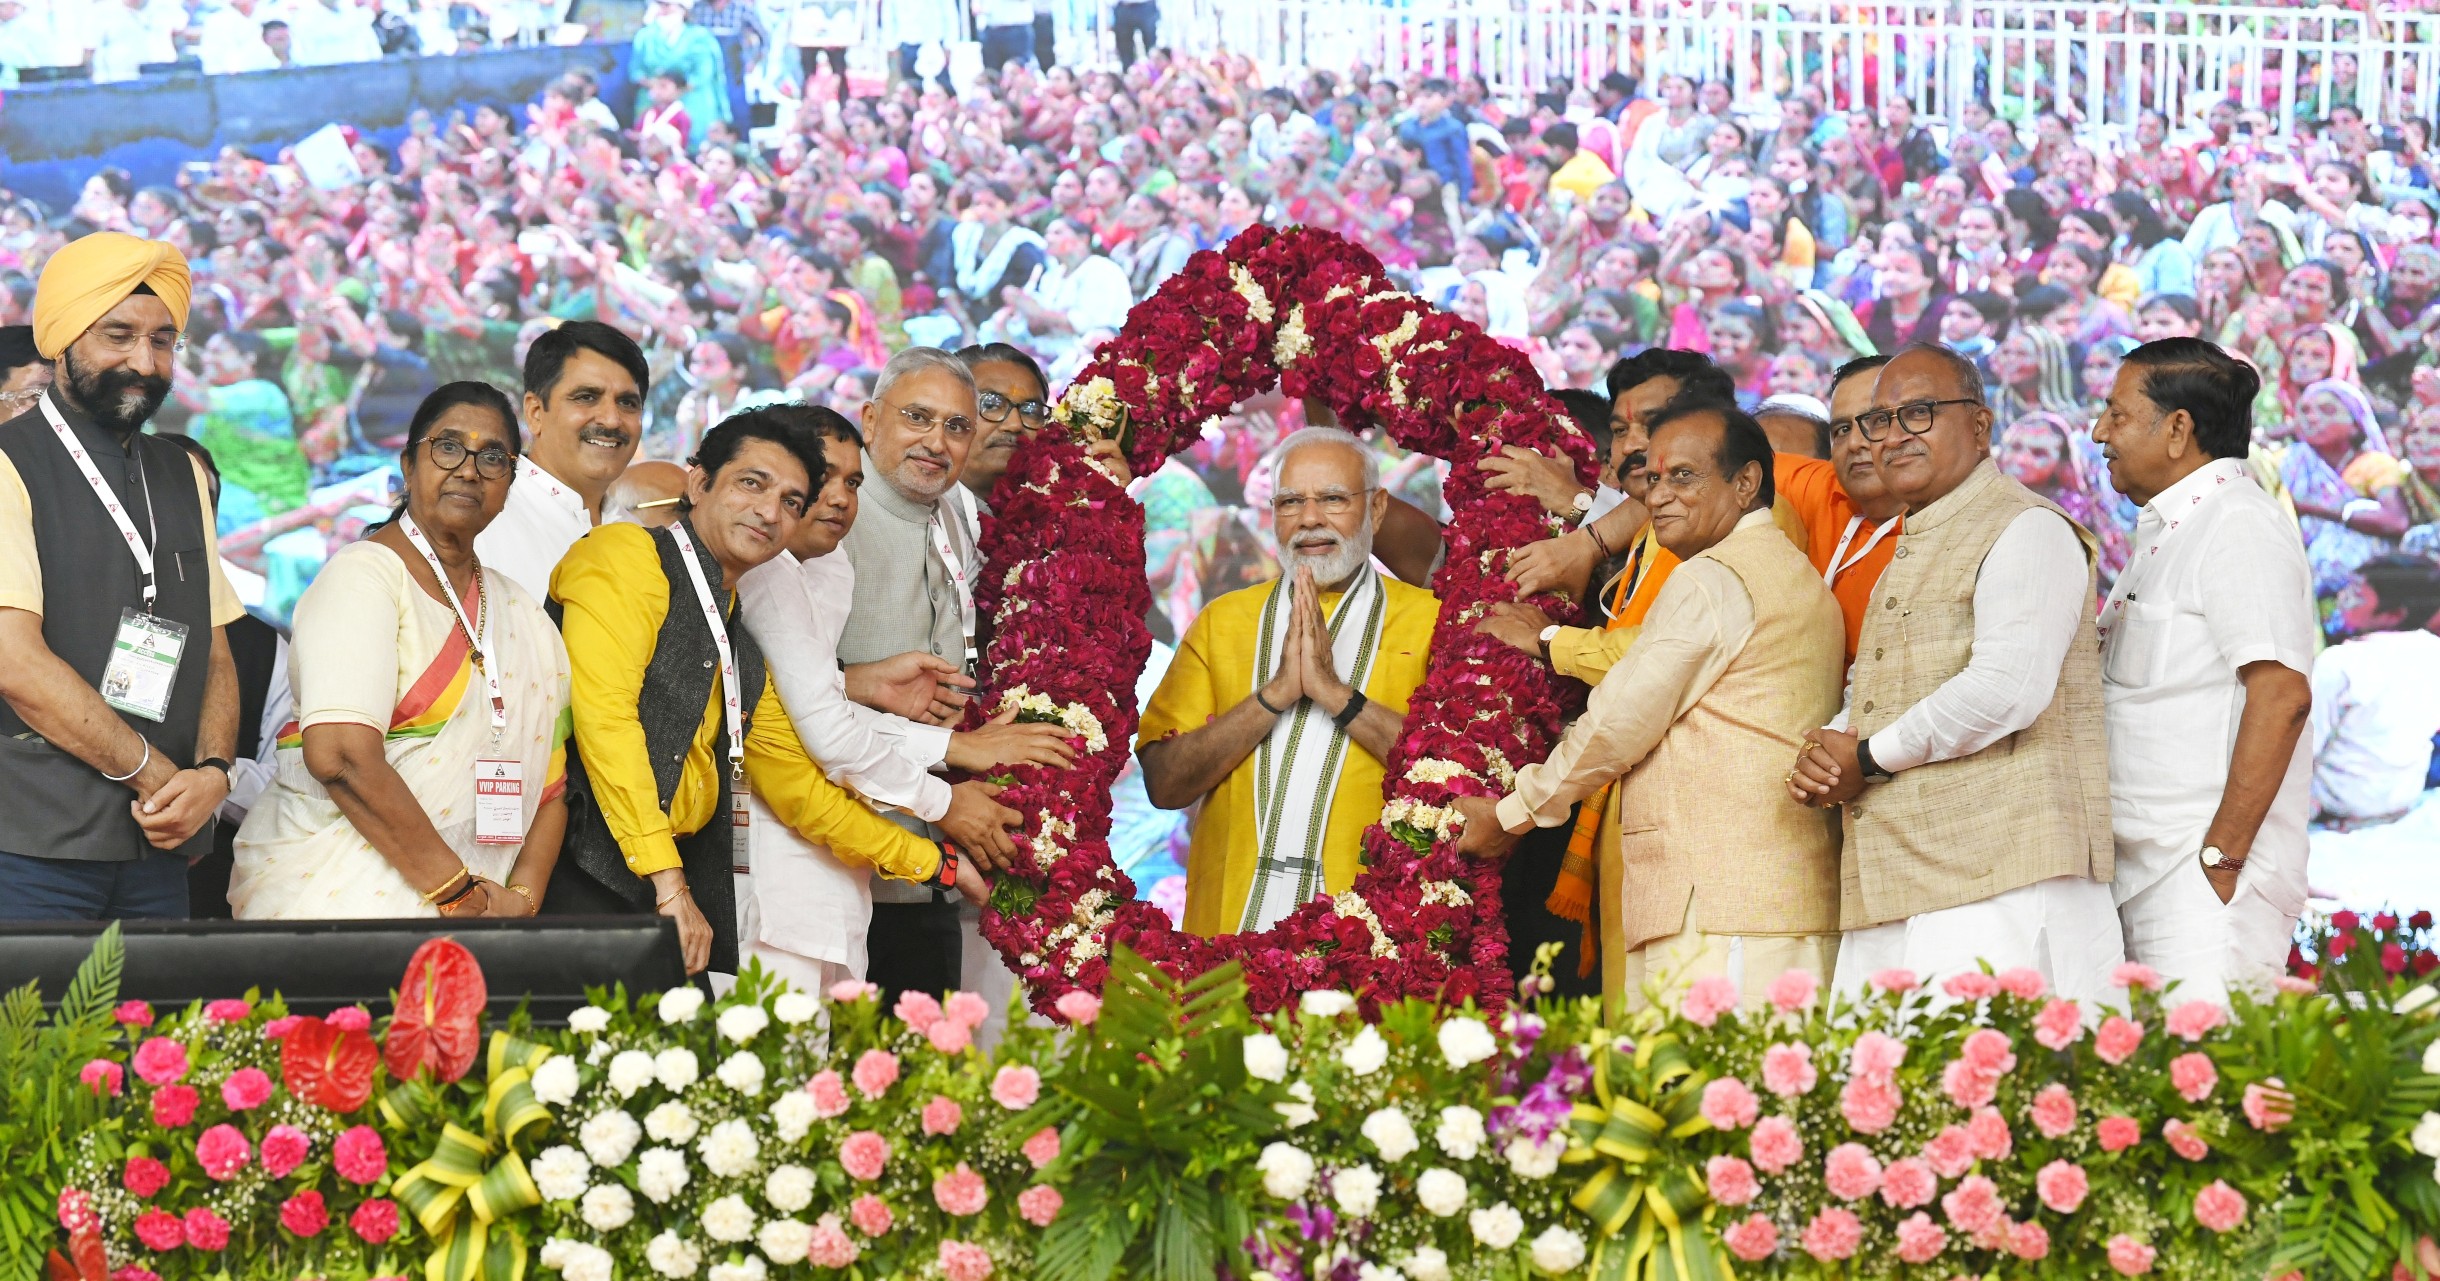 Pm lays foundation stone of various projects worth Rs 1000 crore